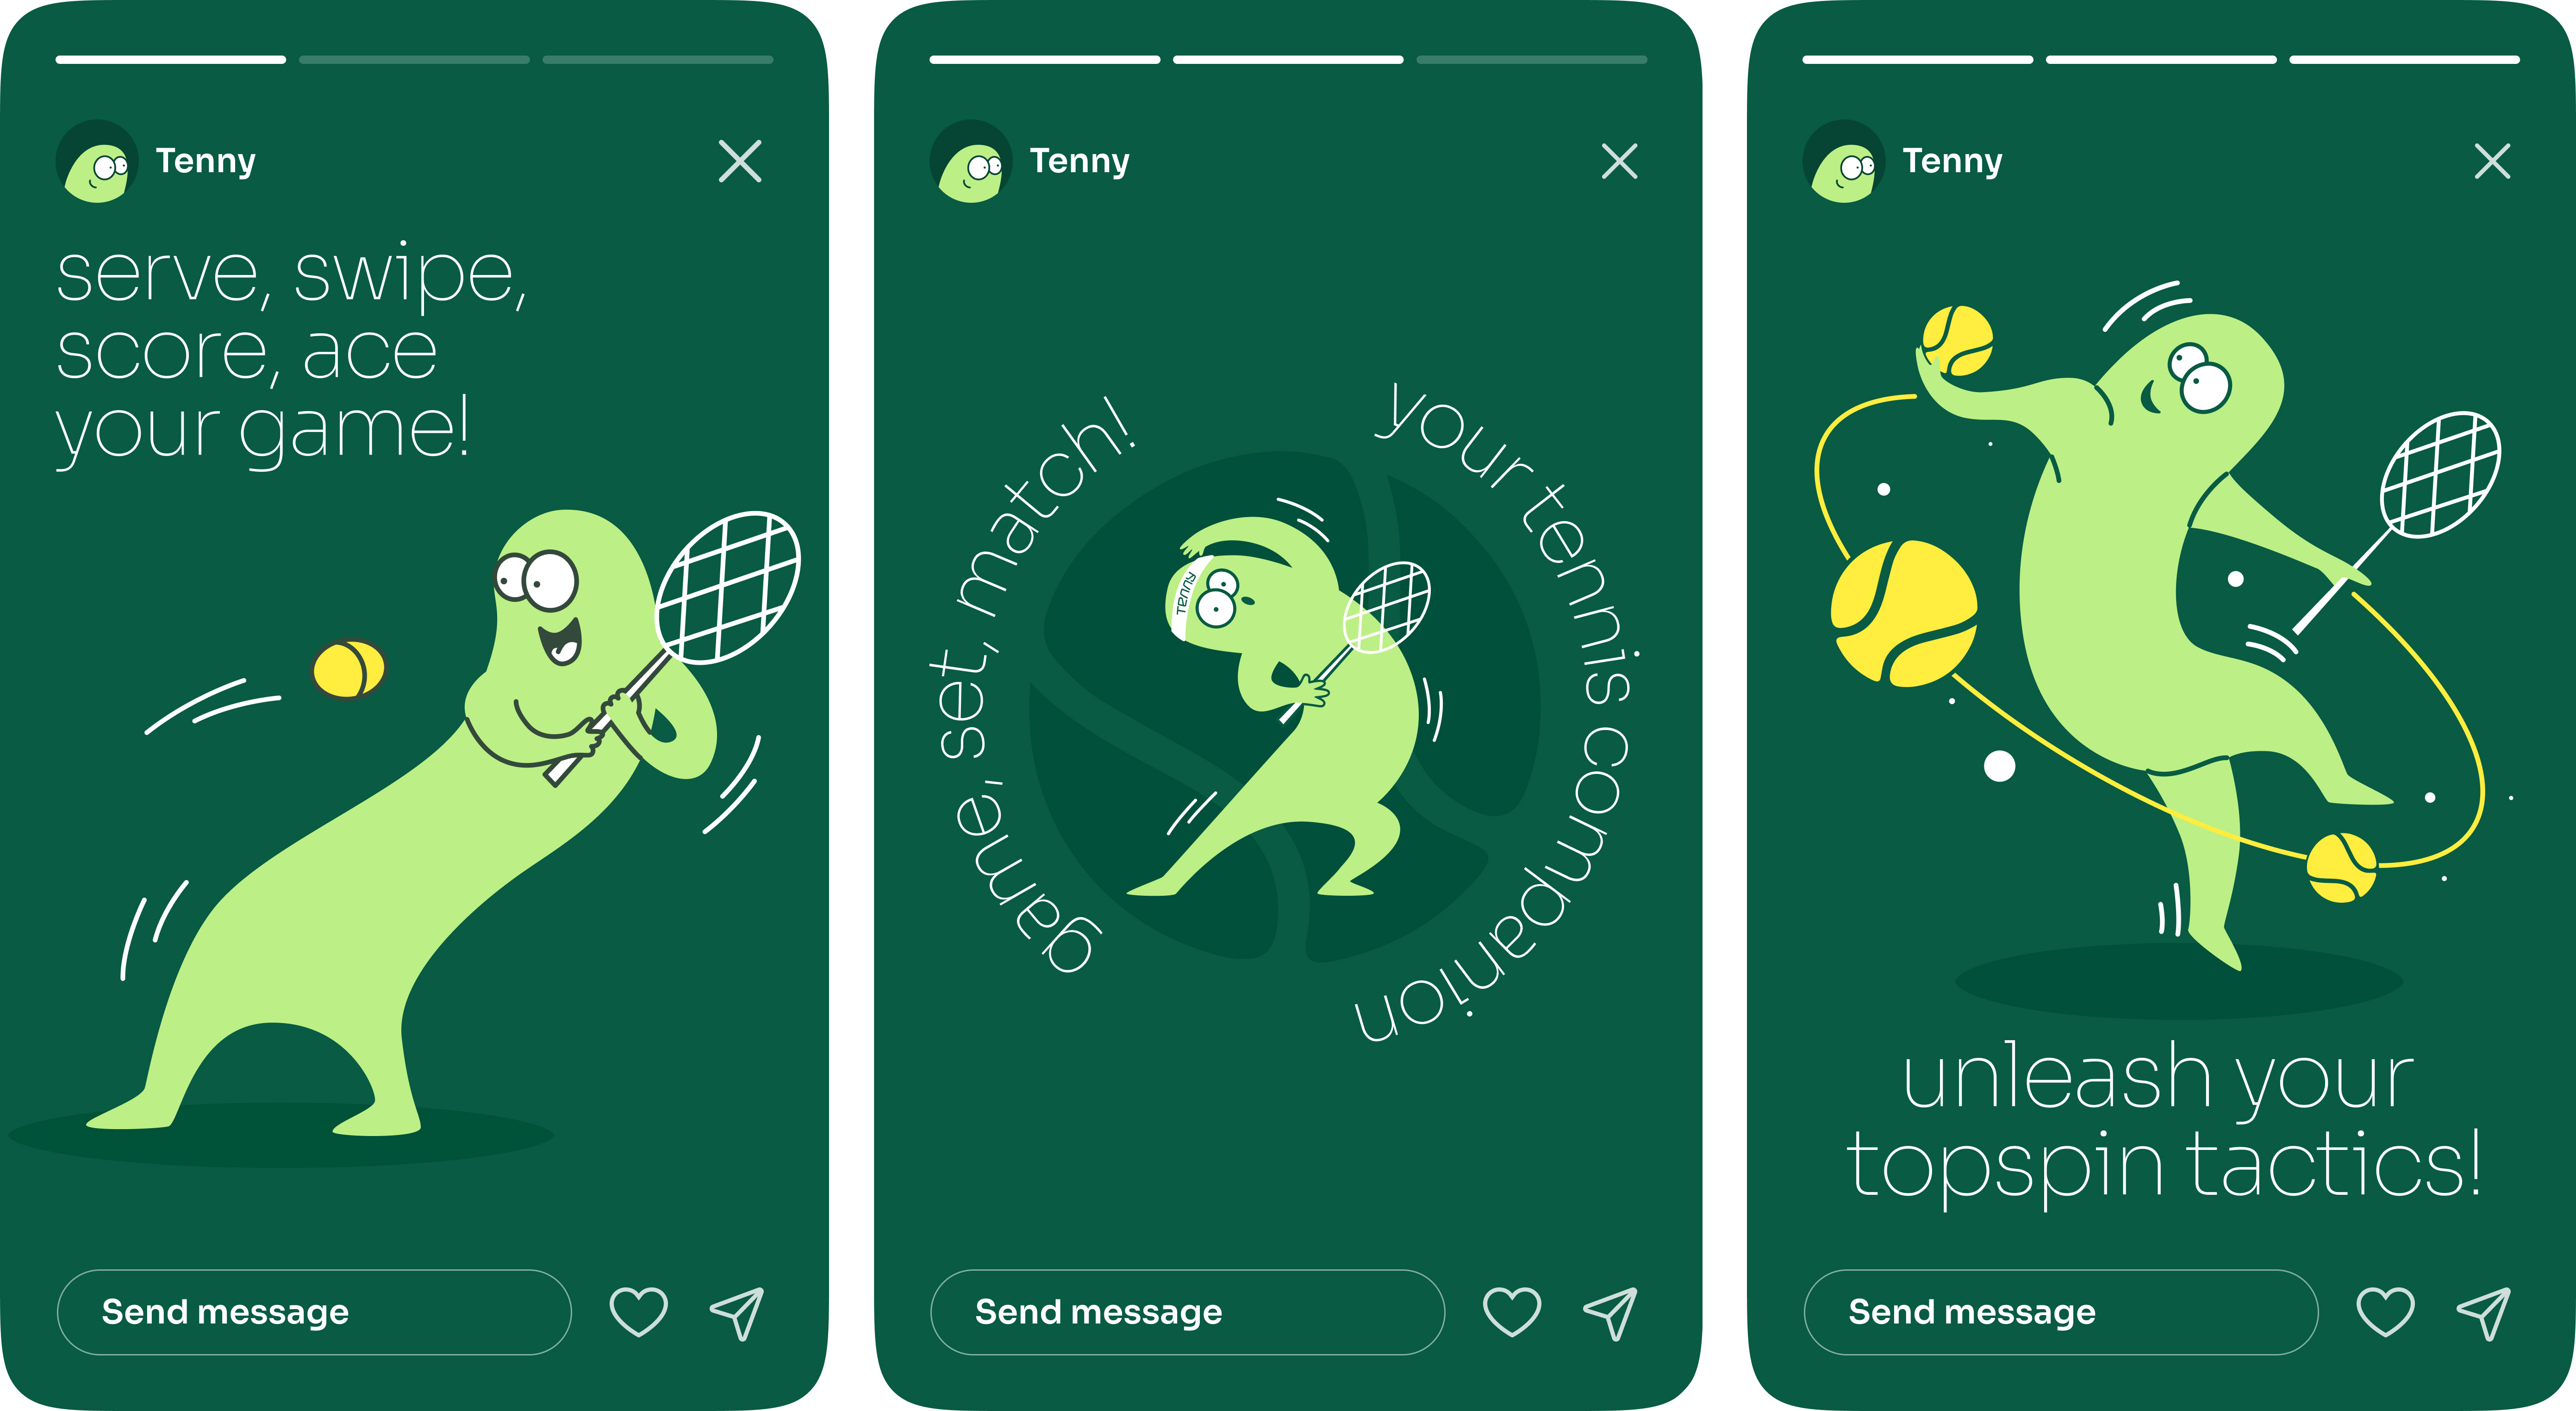 Studuo Brings Tenny’s Vibrant Tennis Brand to Life with Playful Design